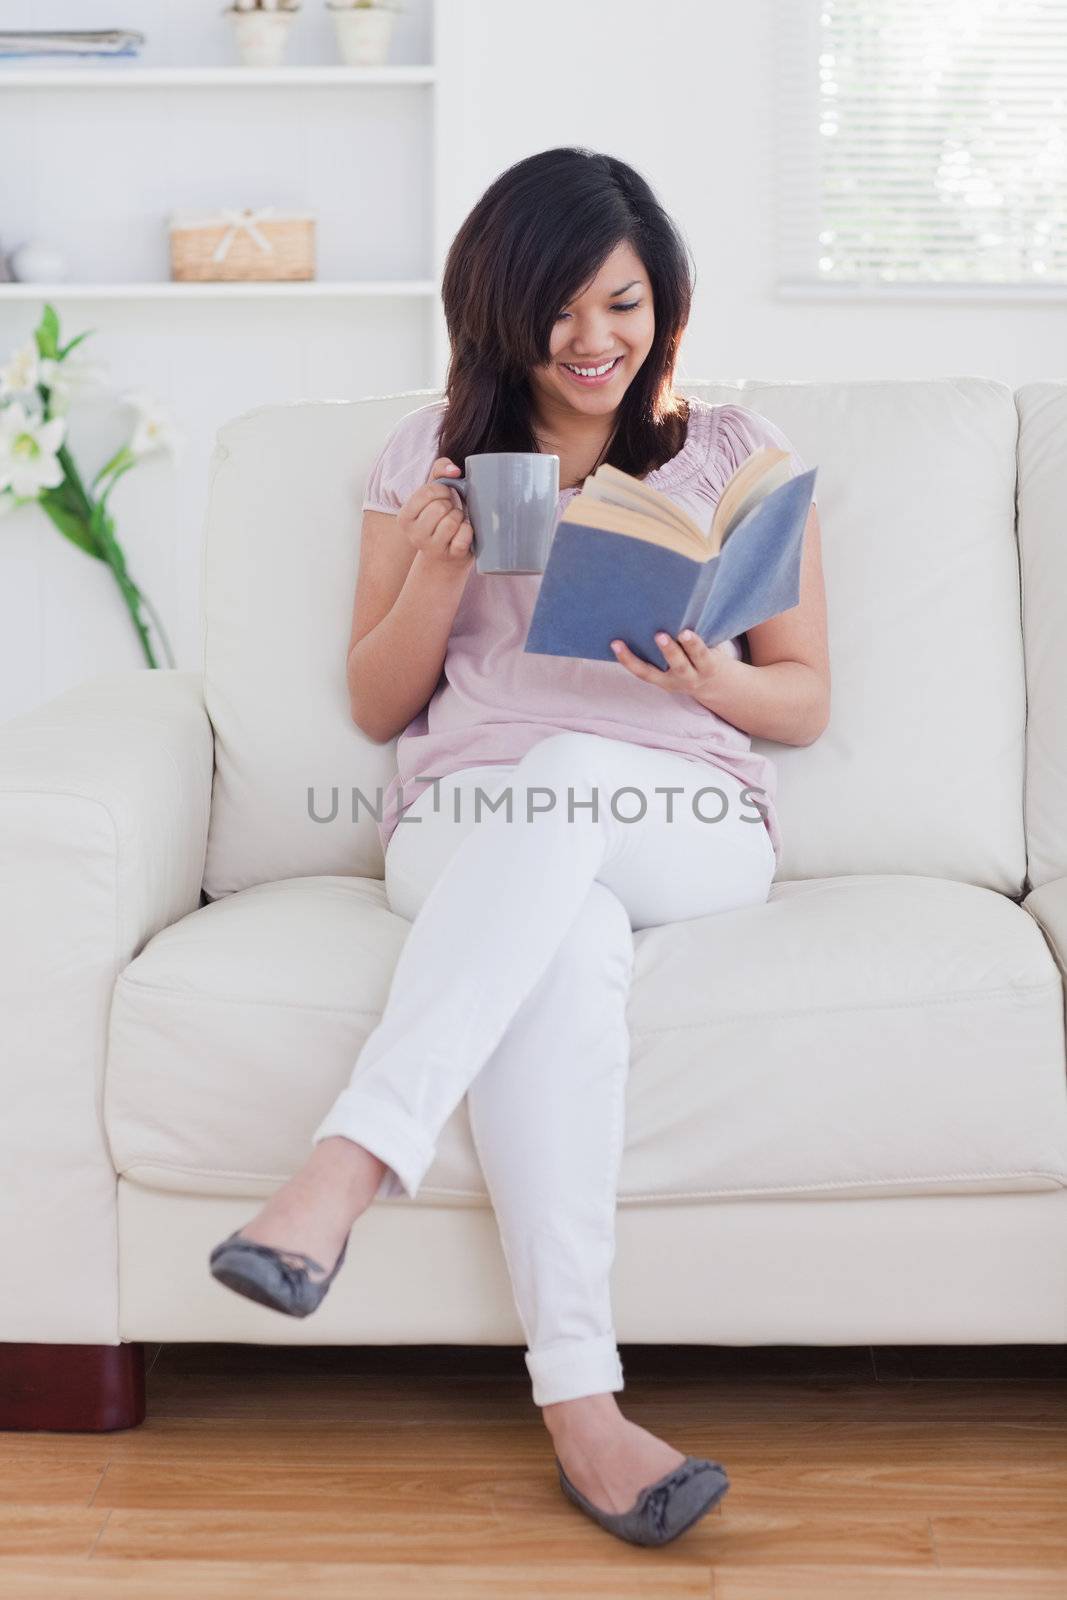 Woman reading a book while sitting on a couch in a living room